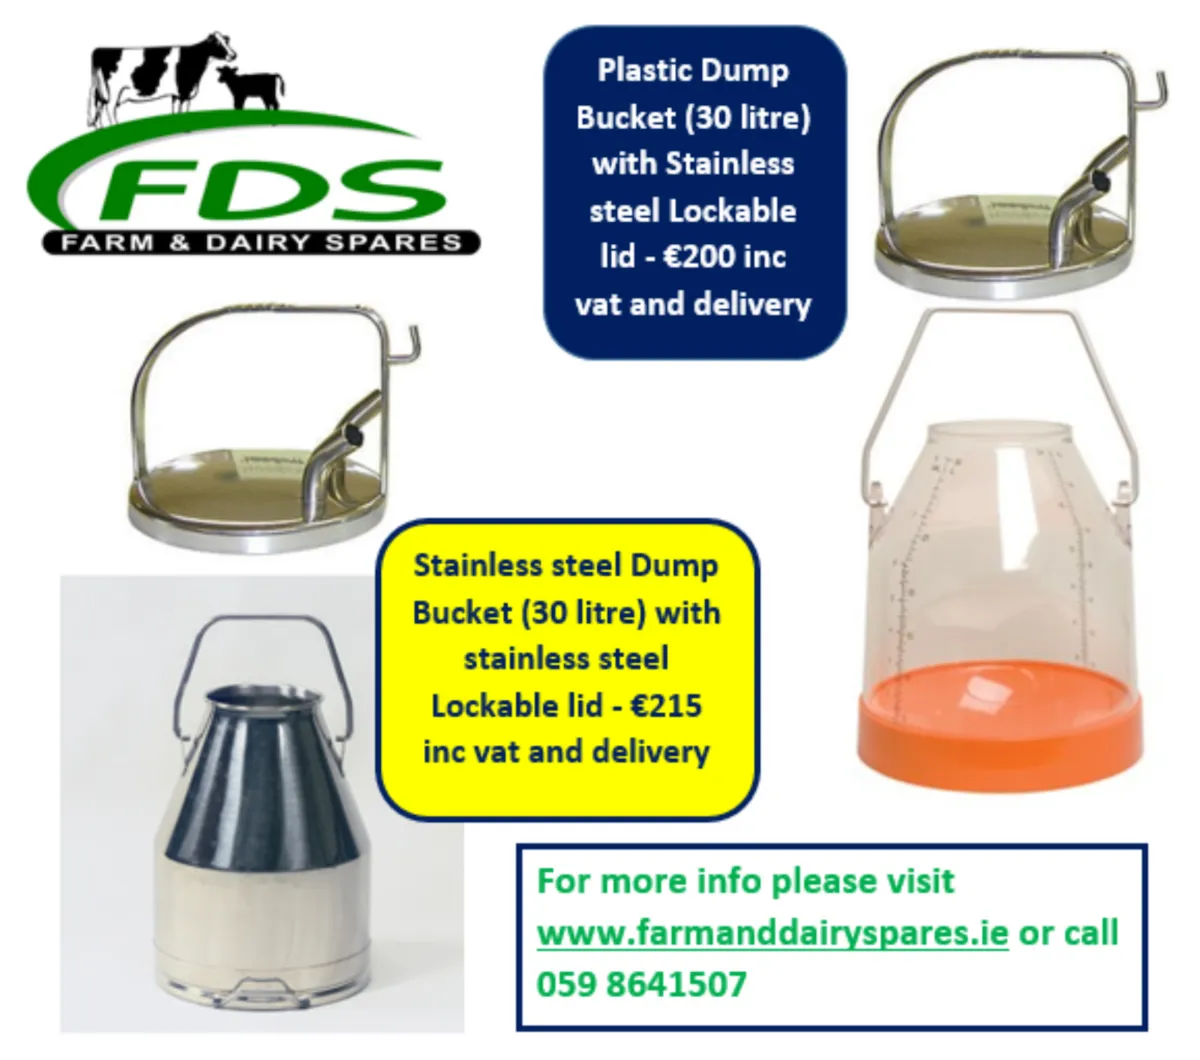 Dump buckets for sale at FDS